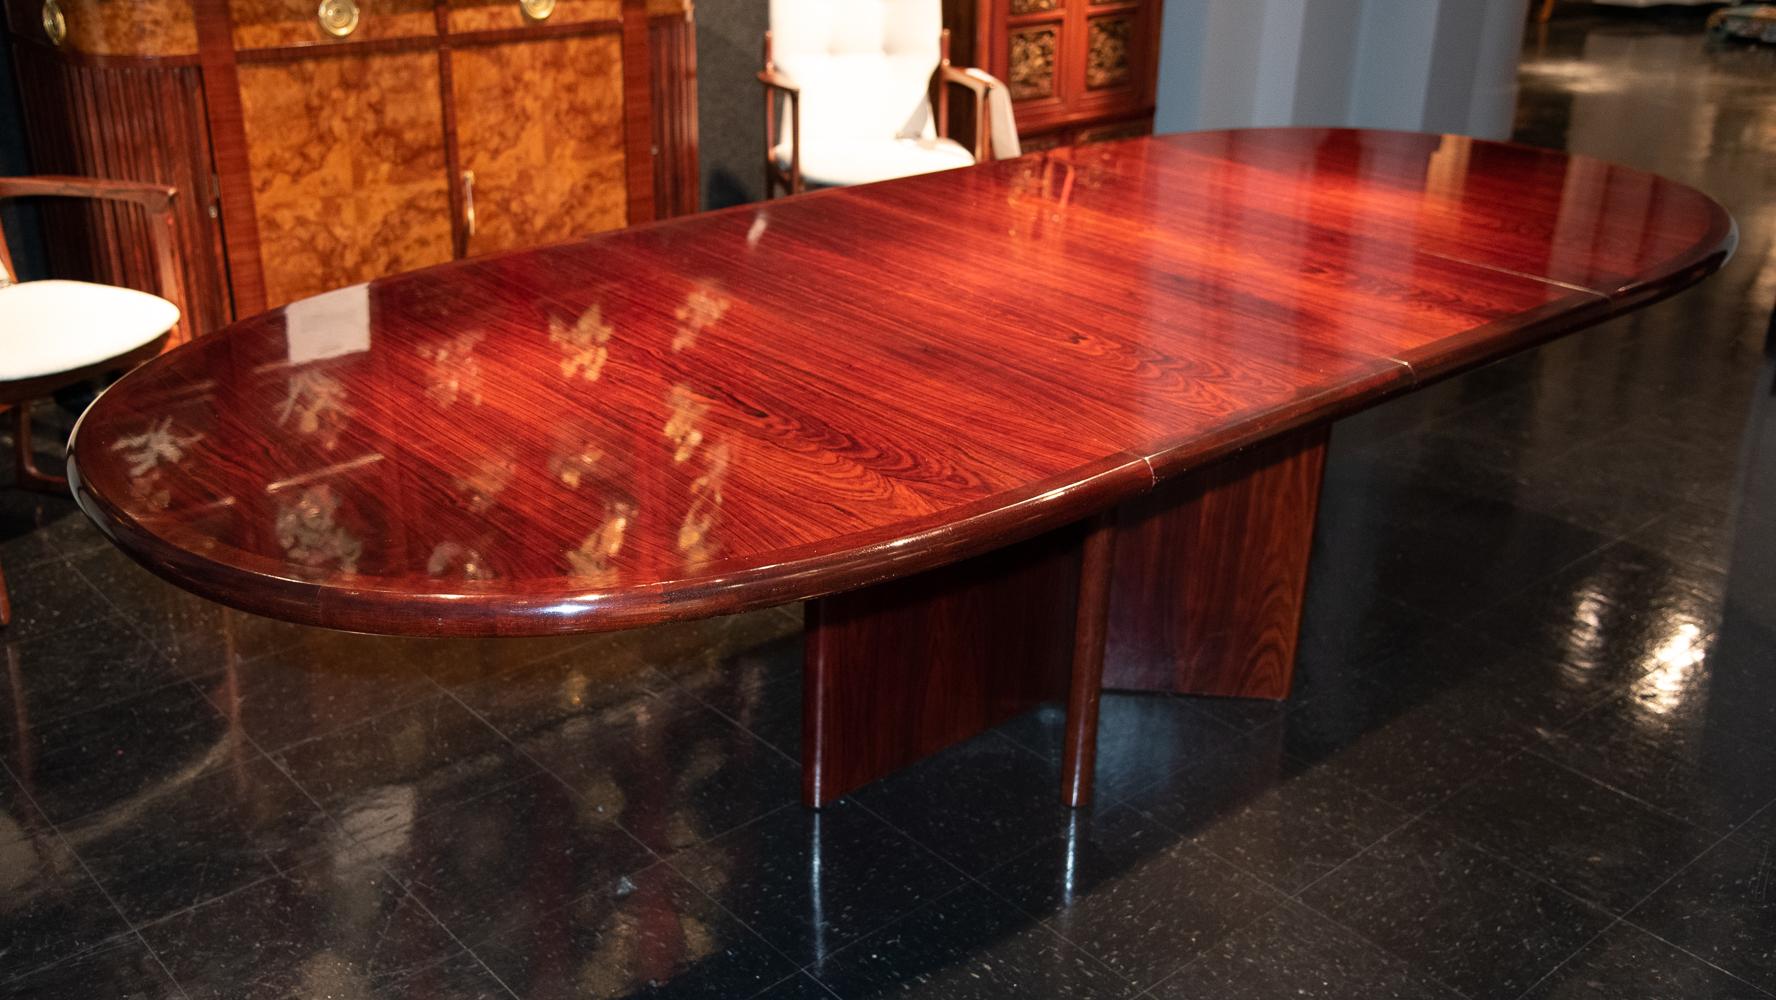 A danish mid-20th century dining or conference table in rich grained rosewood.

The Table features and oval-shaped top with two extensions leaves; raised on a pedestal base designed with six supports extending from floor-to-top of table in